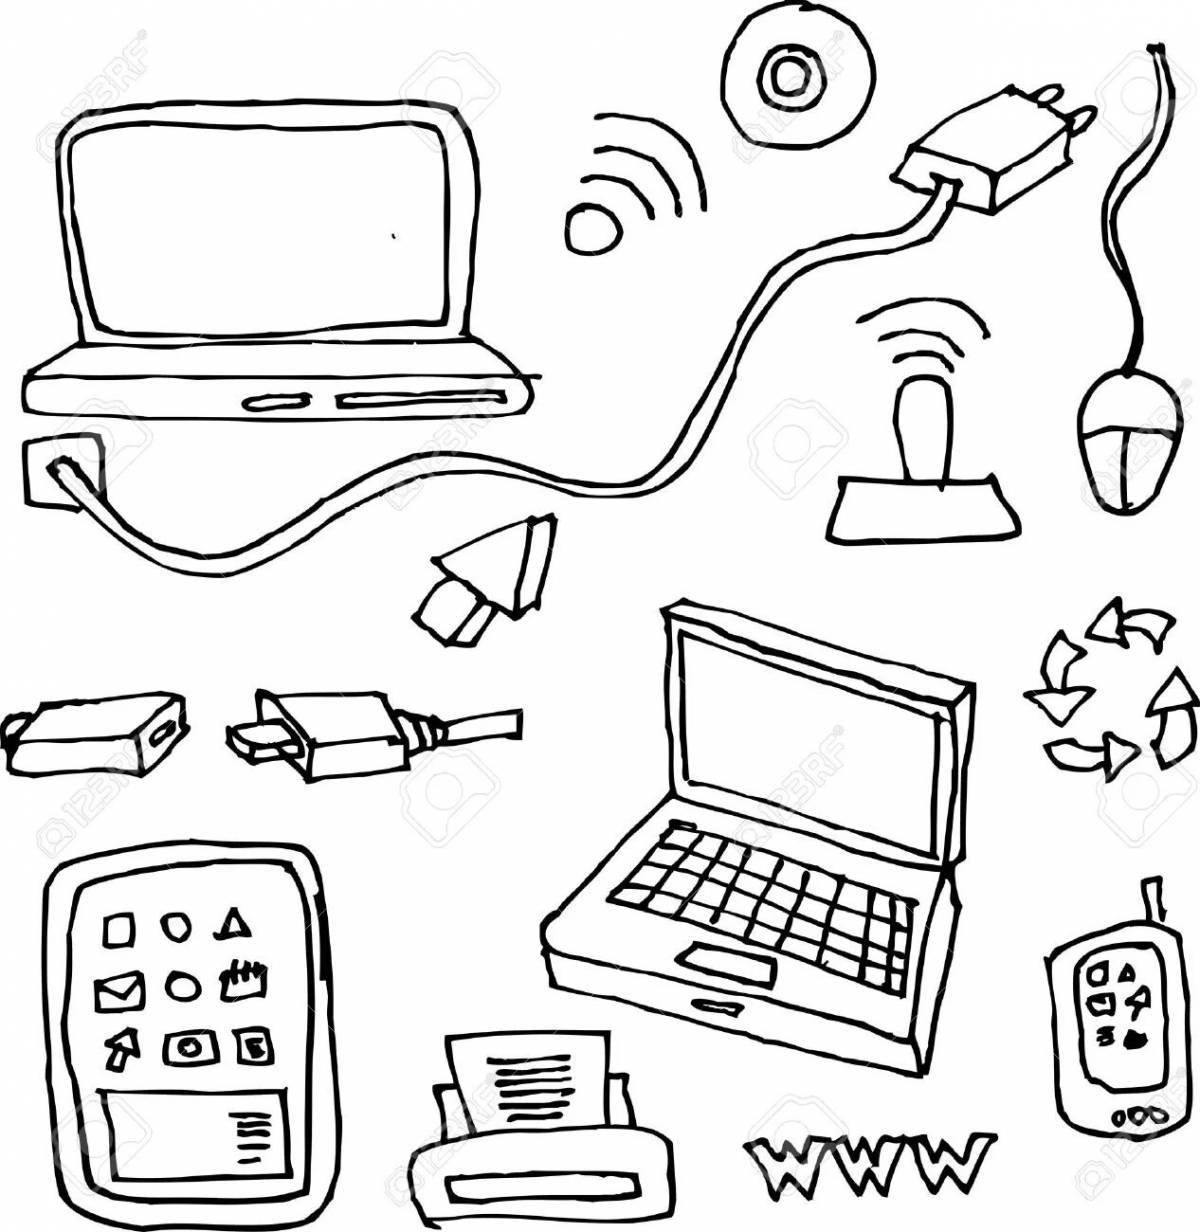 Colour-mad computer science coloring page